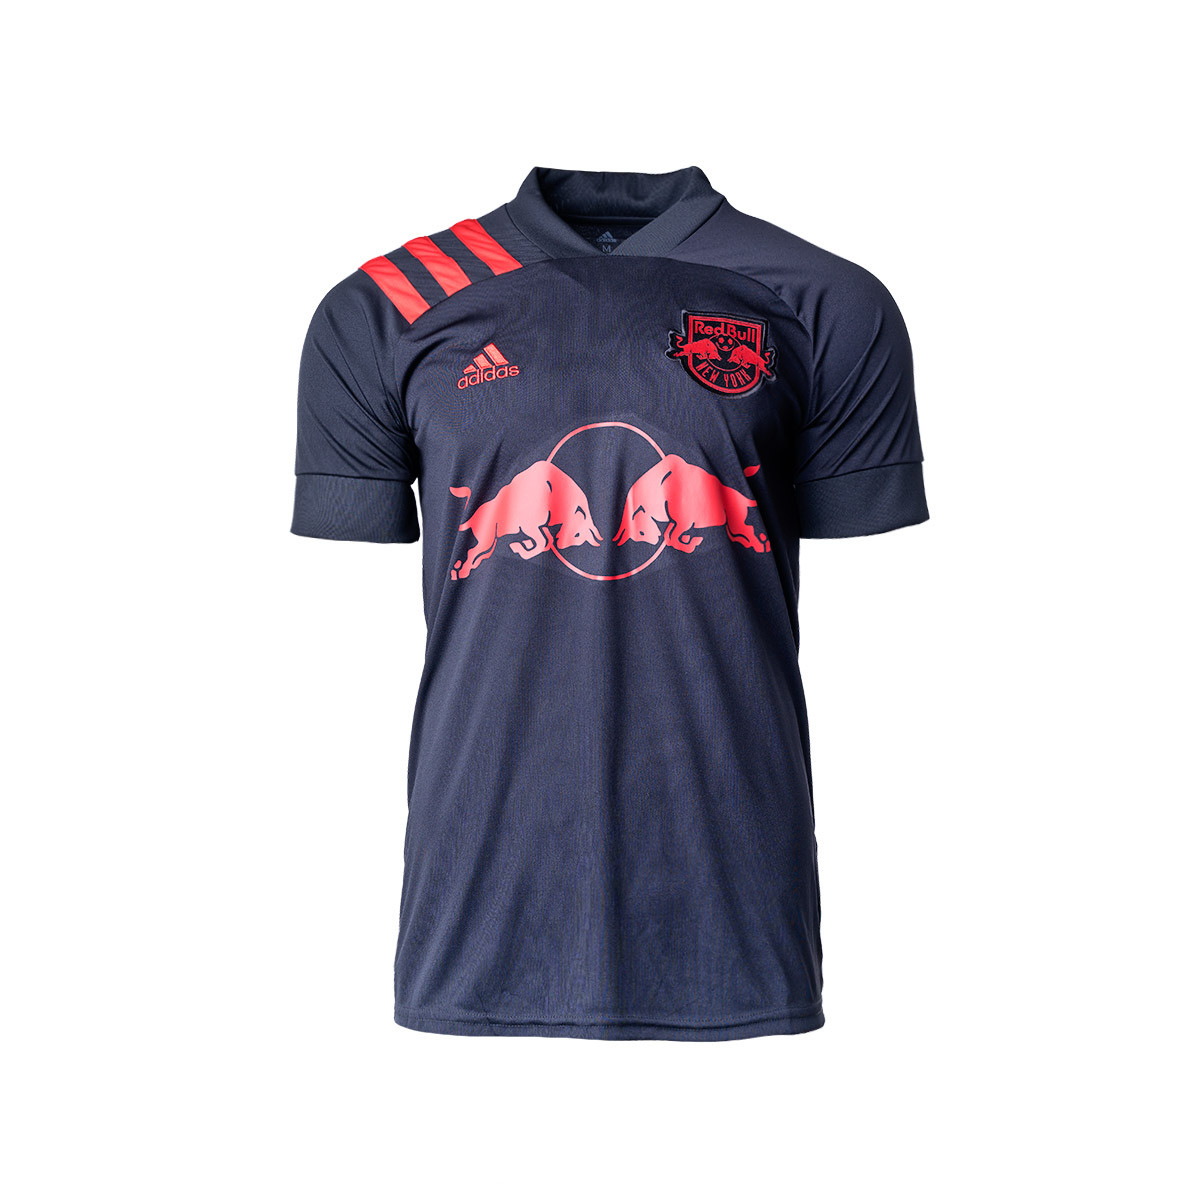 red bull jersey